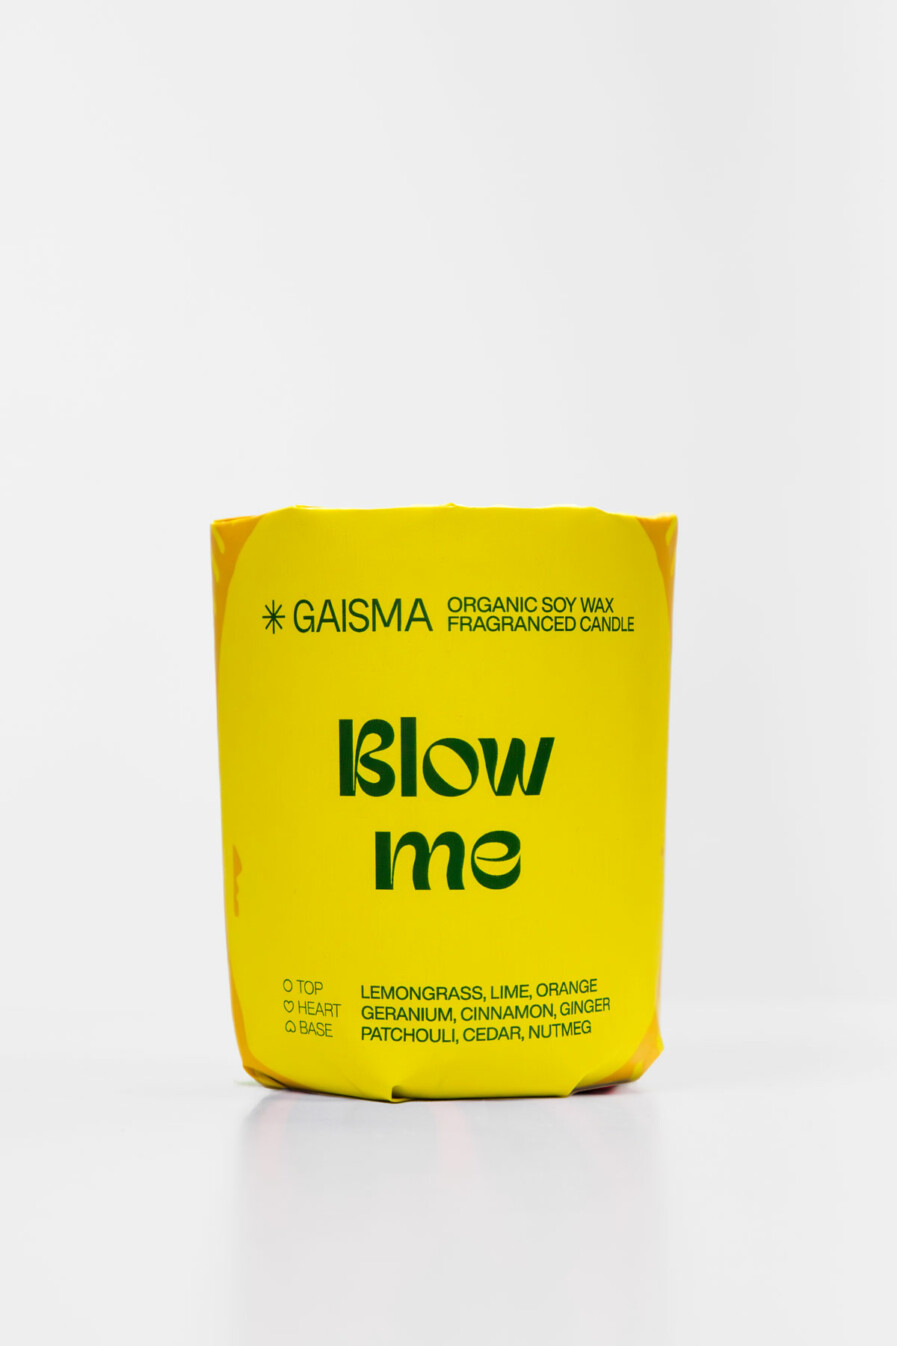 GAISMA 11 Blow Mey Scented Organic Soy Wax Candle